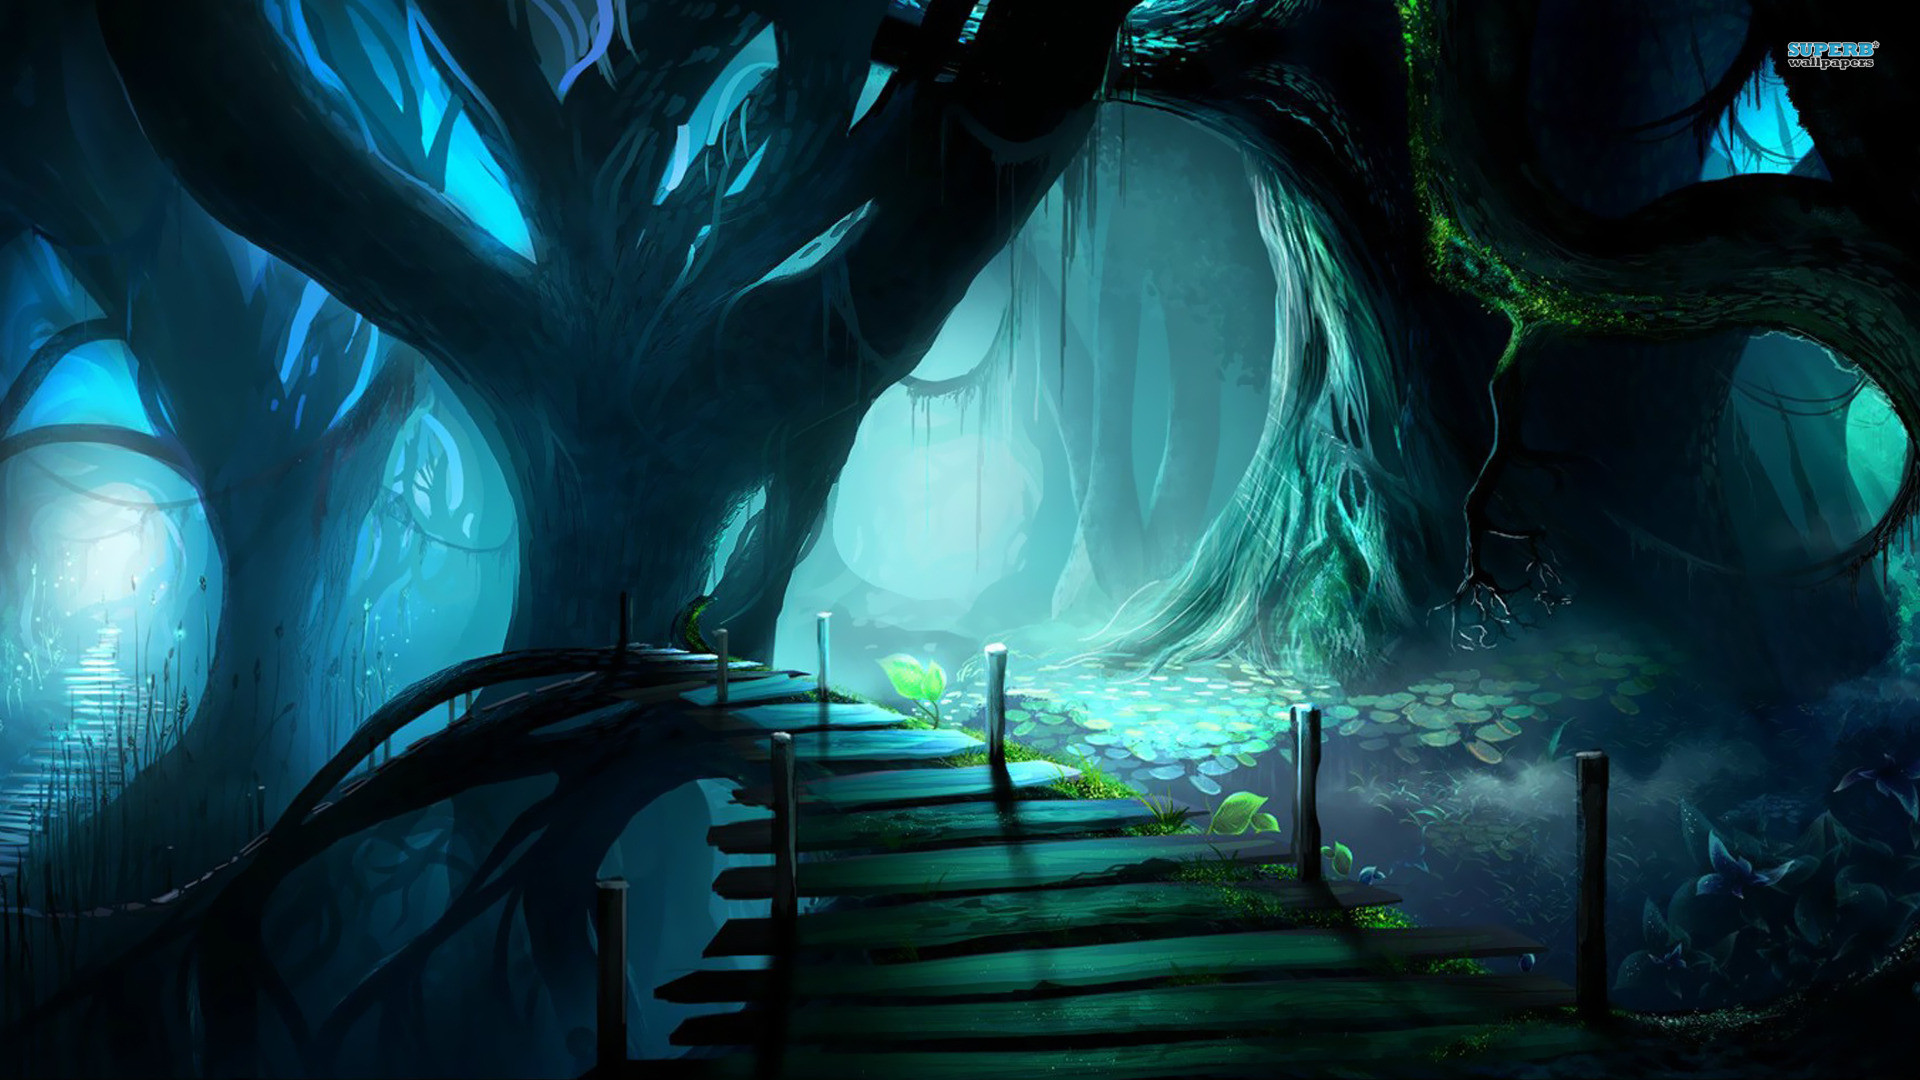 Druid forest / Path in a scary forest wallpaper